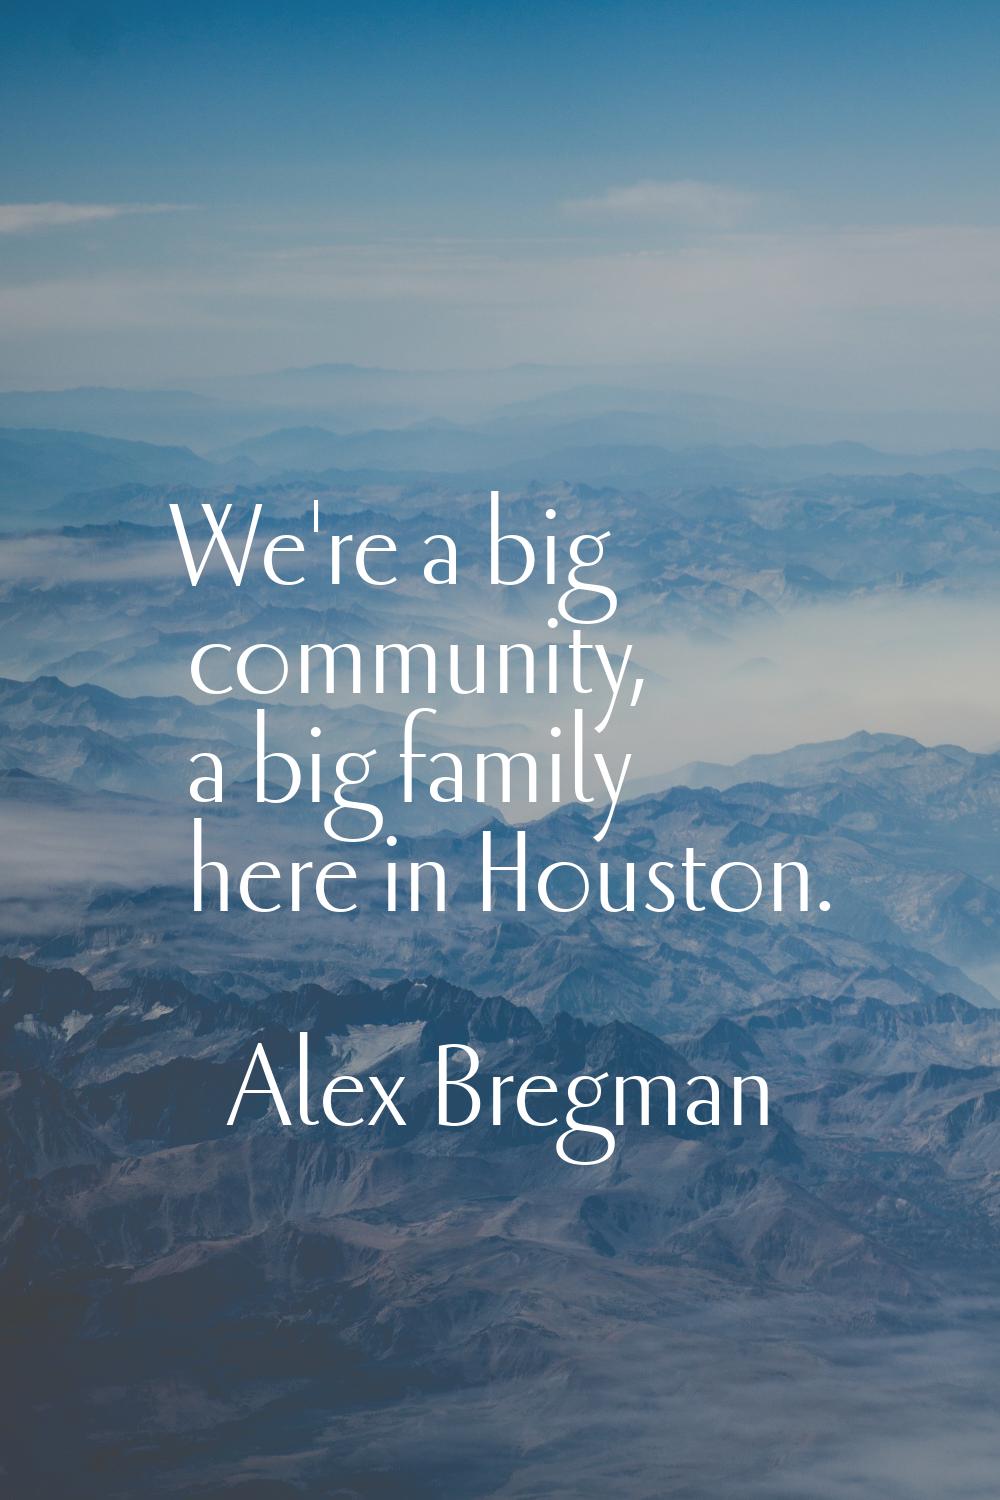 We're a big community, a big family here in Houston.